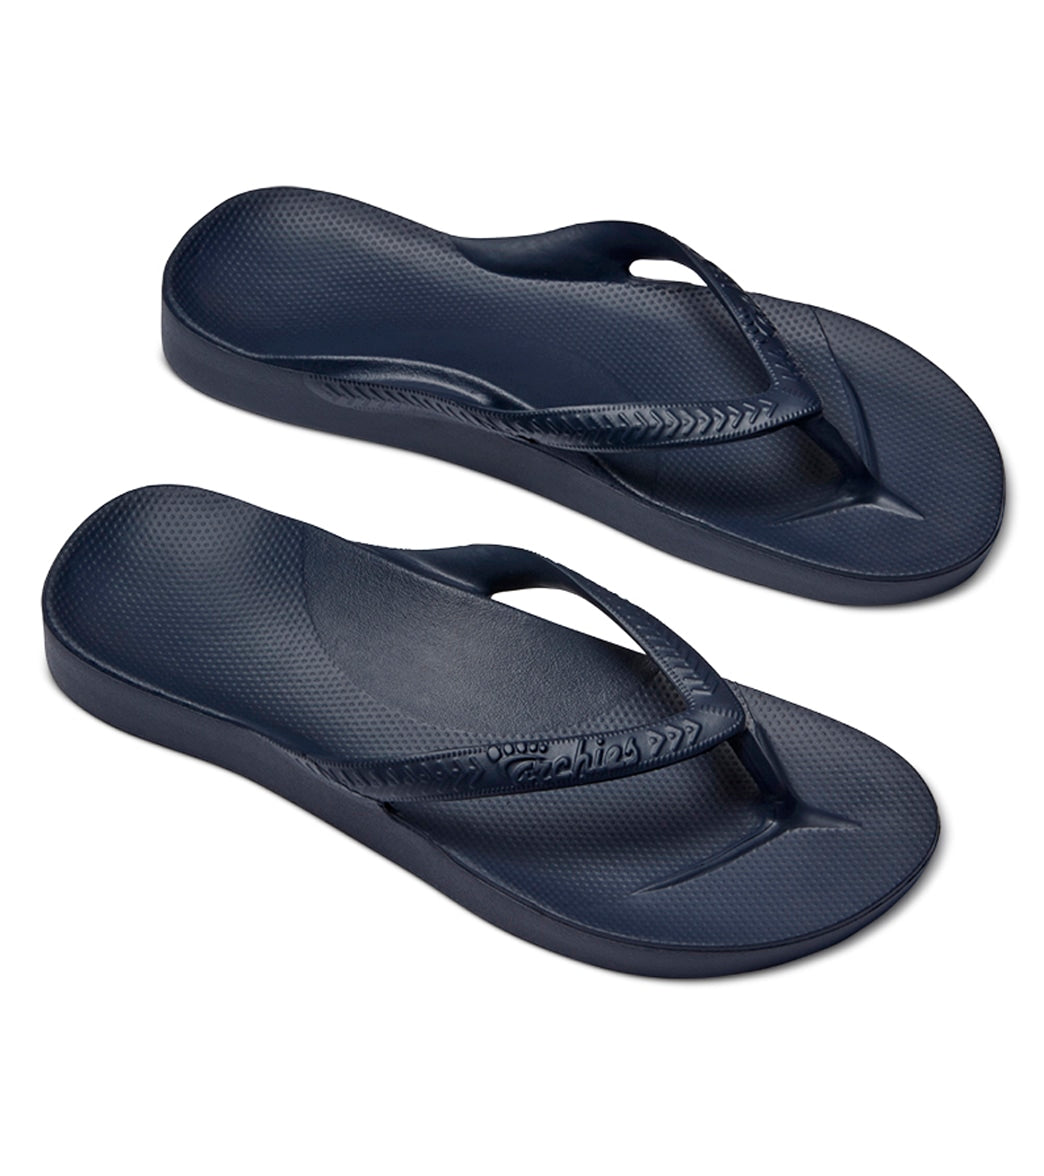 Archies Footwear Arch Support Flip Flops at